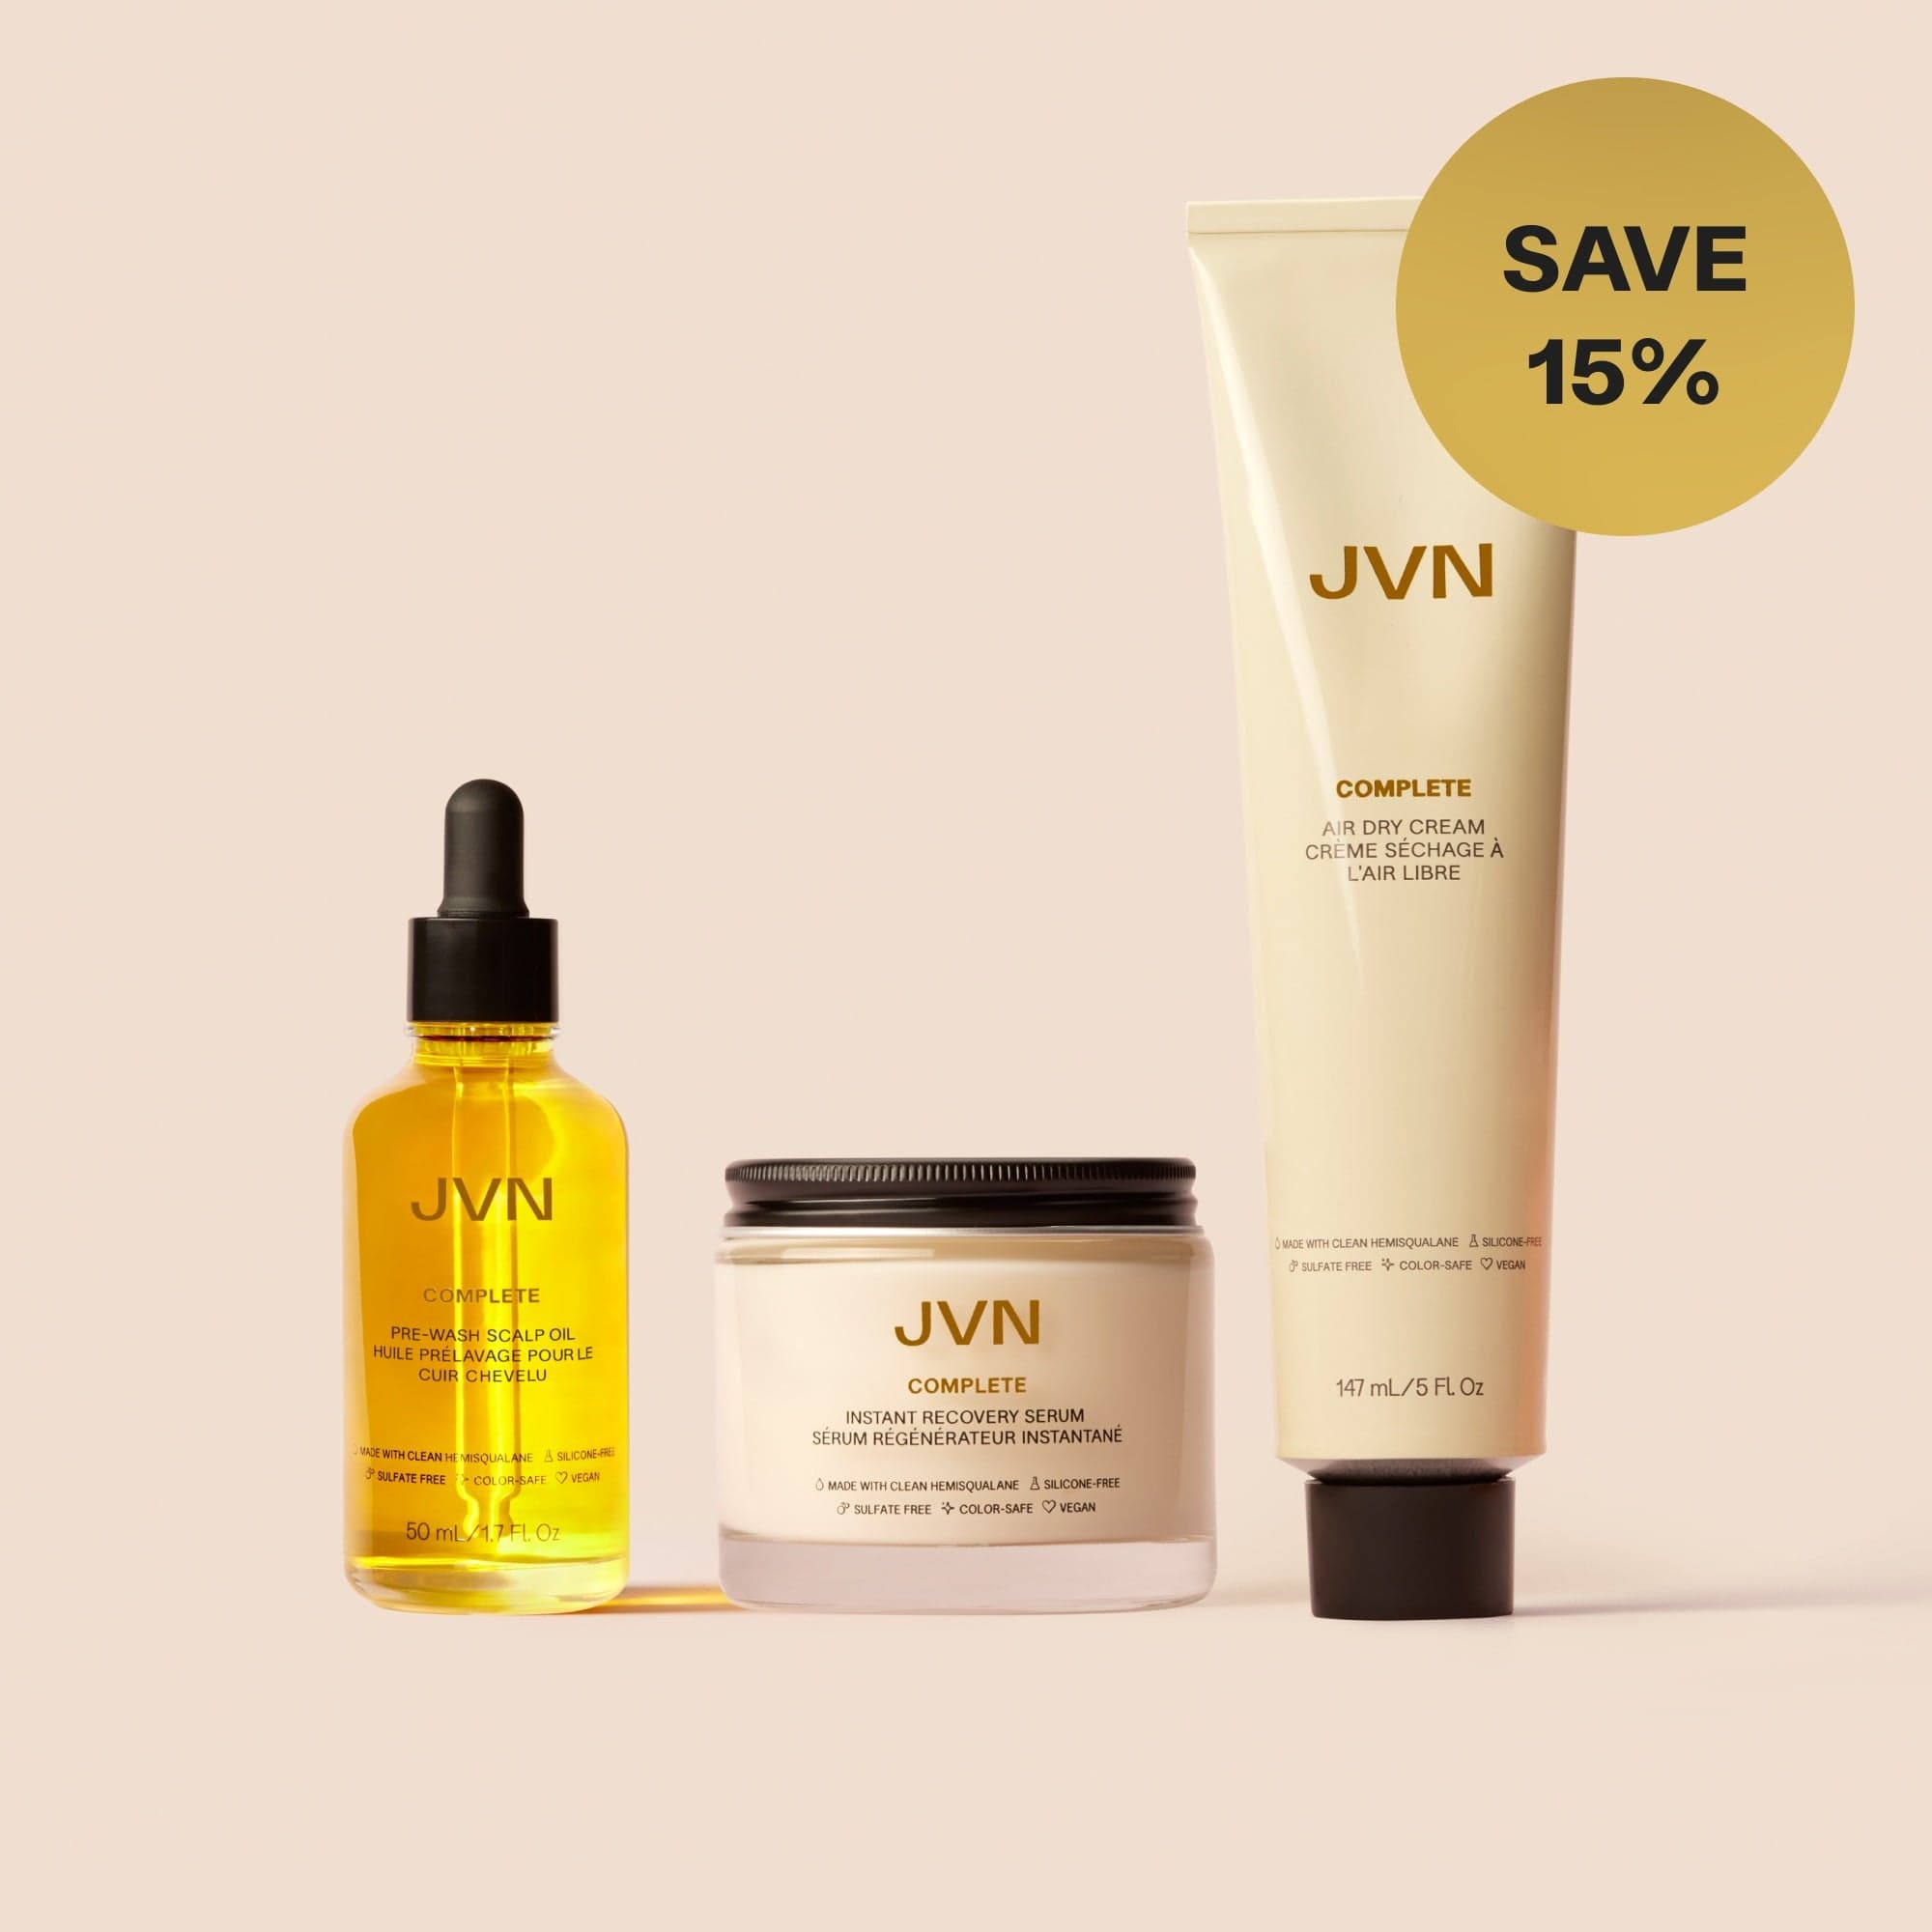 JVN Hair Ultimate Air Dry Routine sulfate-free silicone-free sustainable